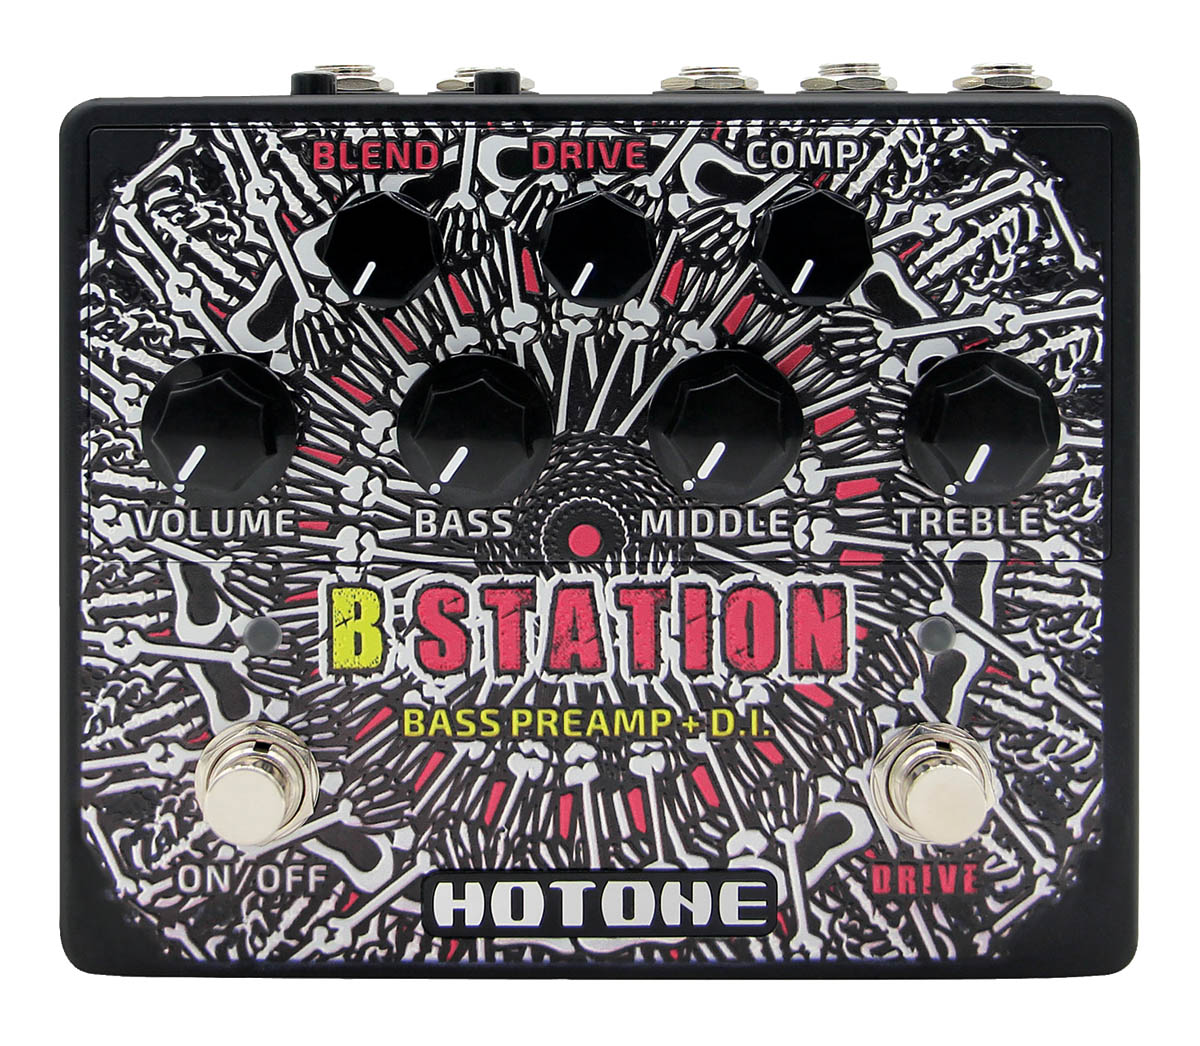 HOTONE 211510 B Station Bass Preamp